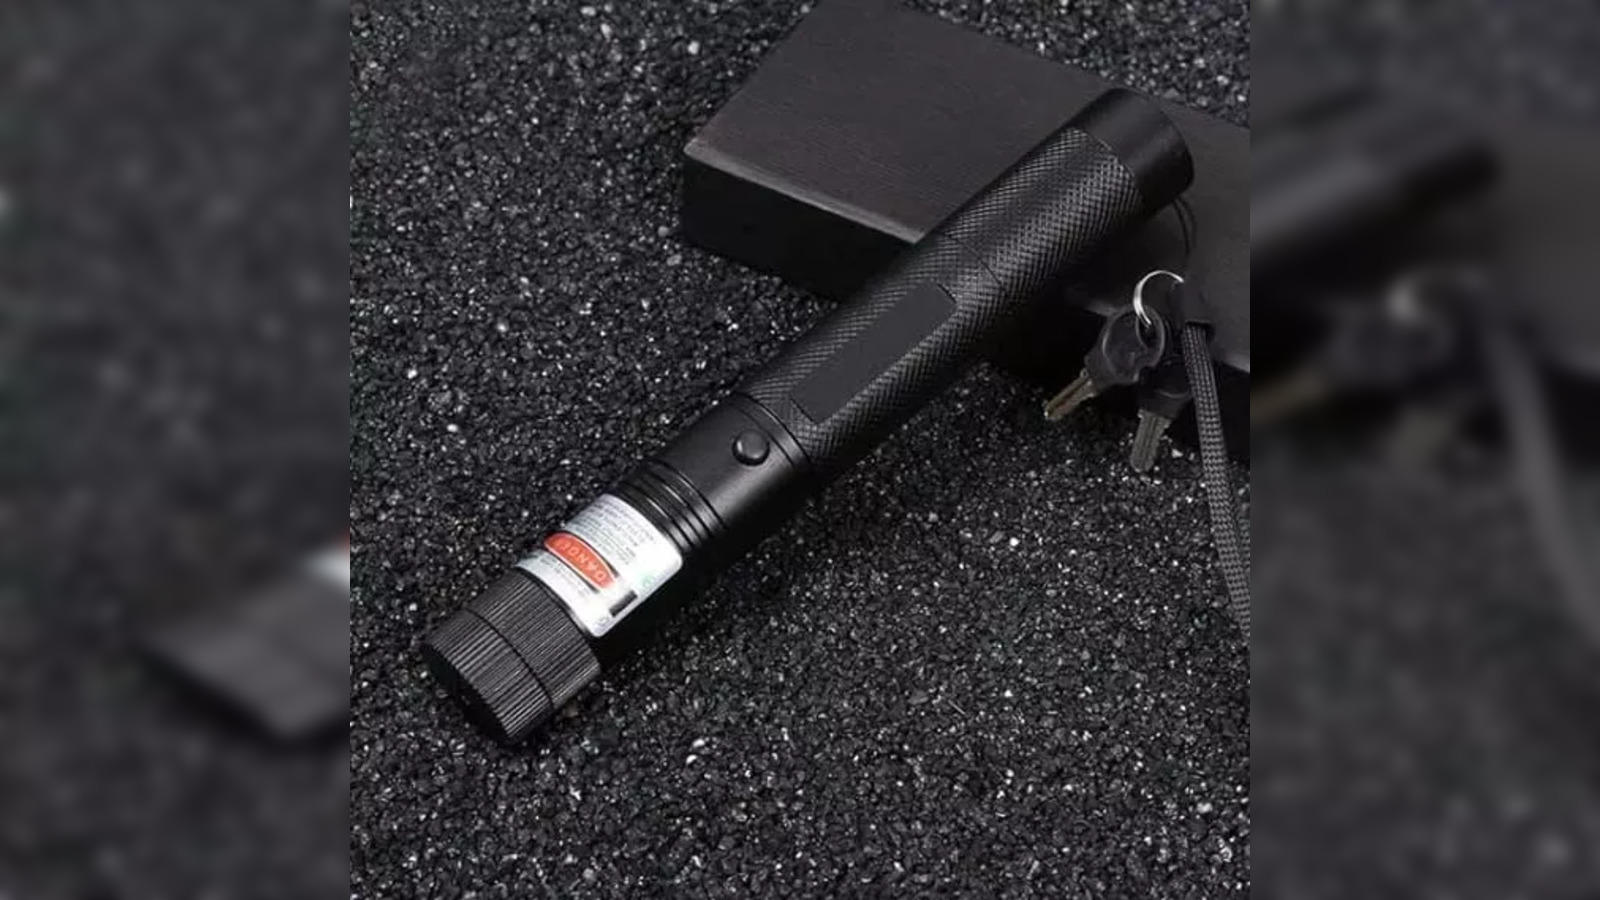 USB Rechargeable Smart Laser Pointer - Laser Pointer Store